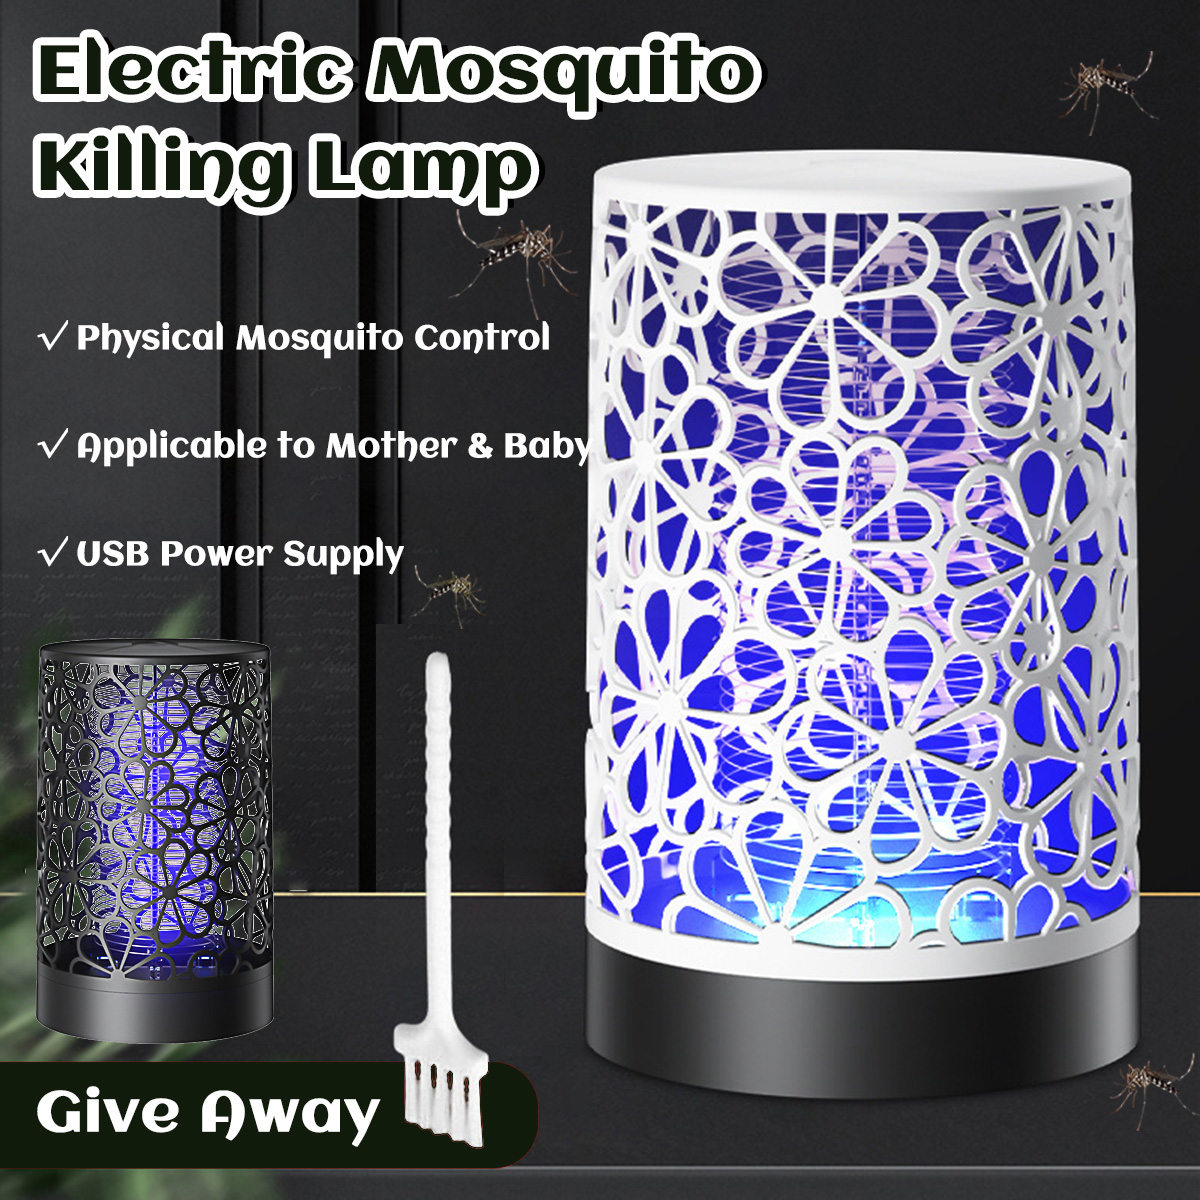 Bakeey-Mosquito-Killing-Lamp-360-Degrees-Trapping-USB-Charging-Cable-Power-UV-Mosquito-Killer-1857253-1